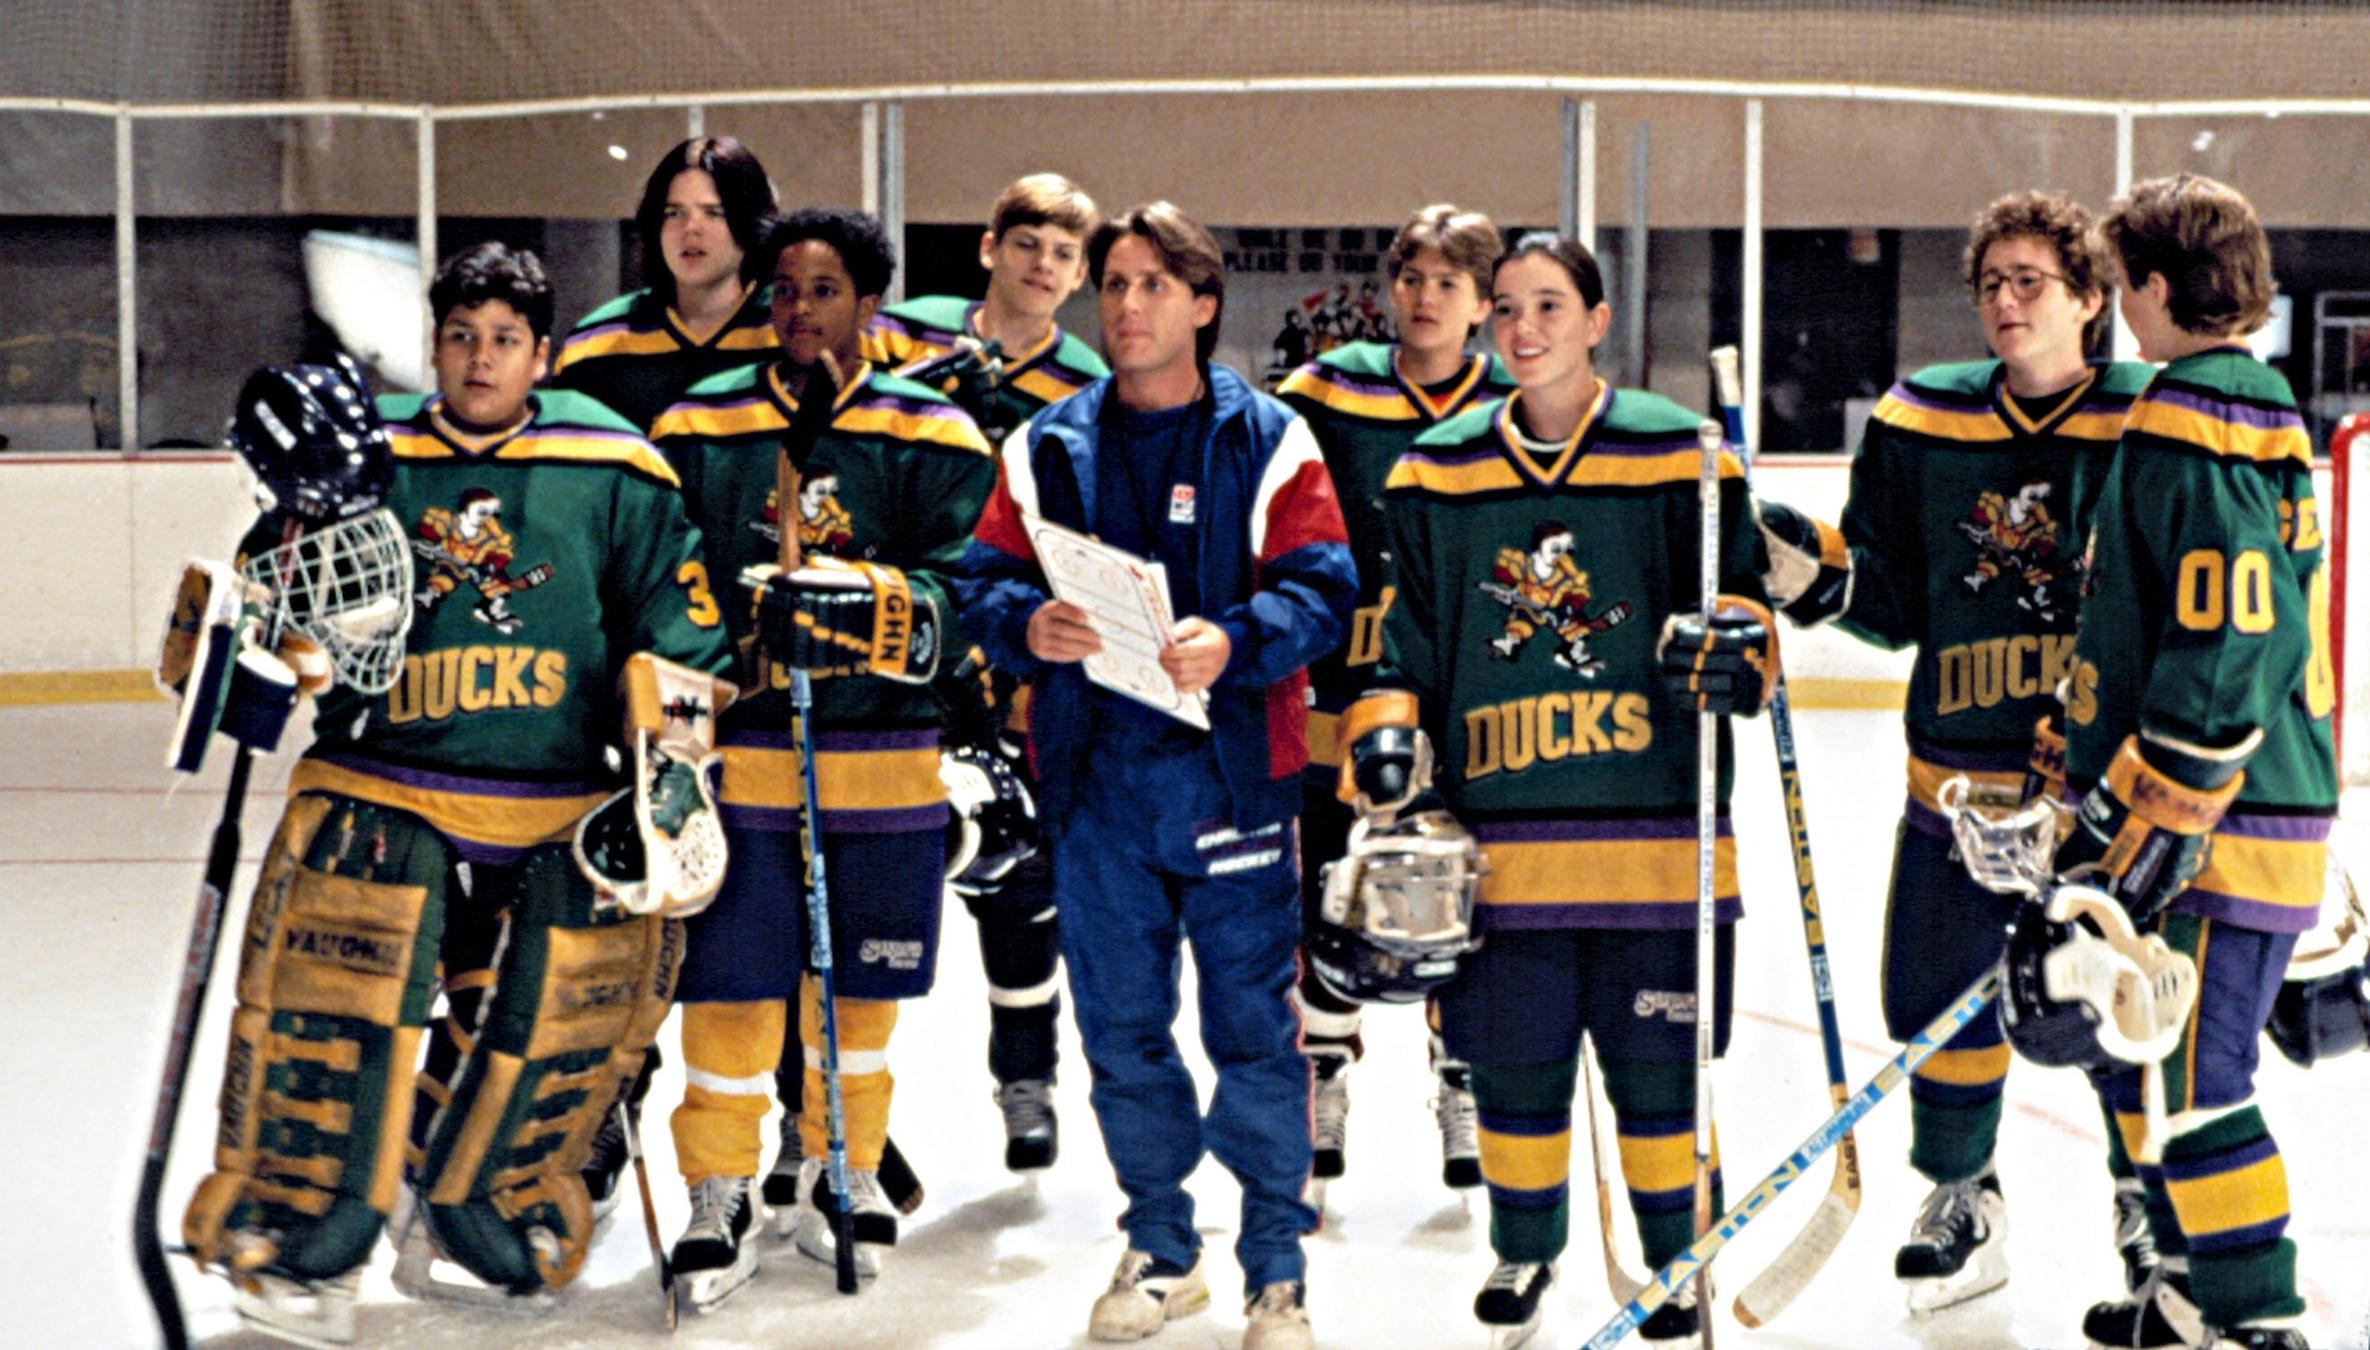 Disney+ Is Bringing Back 'The Mighty Ducks' and Casting Now